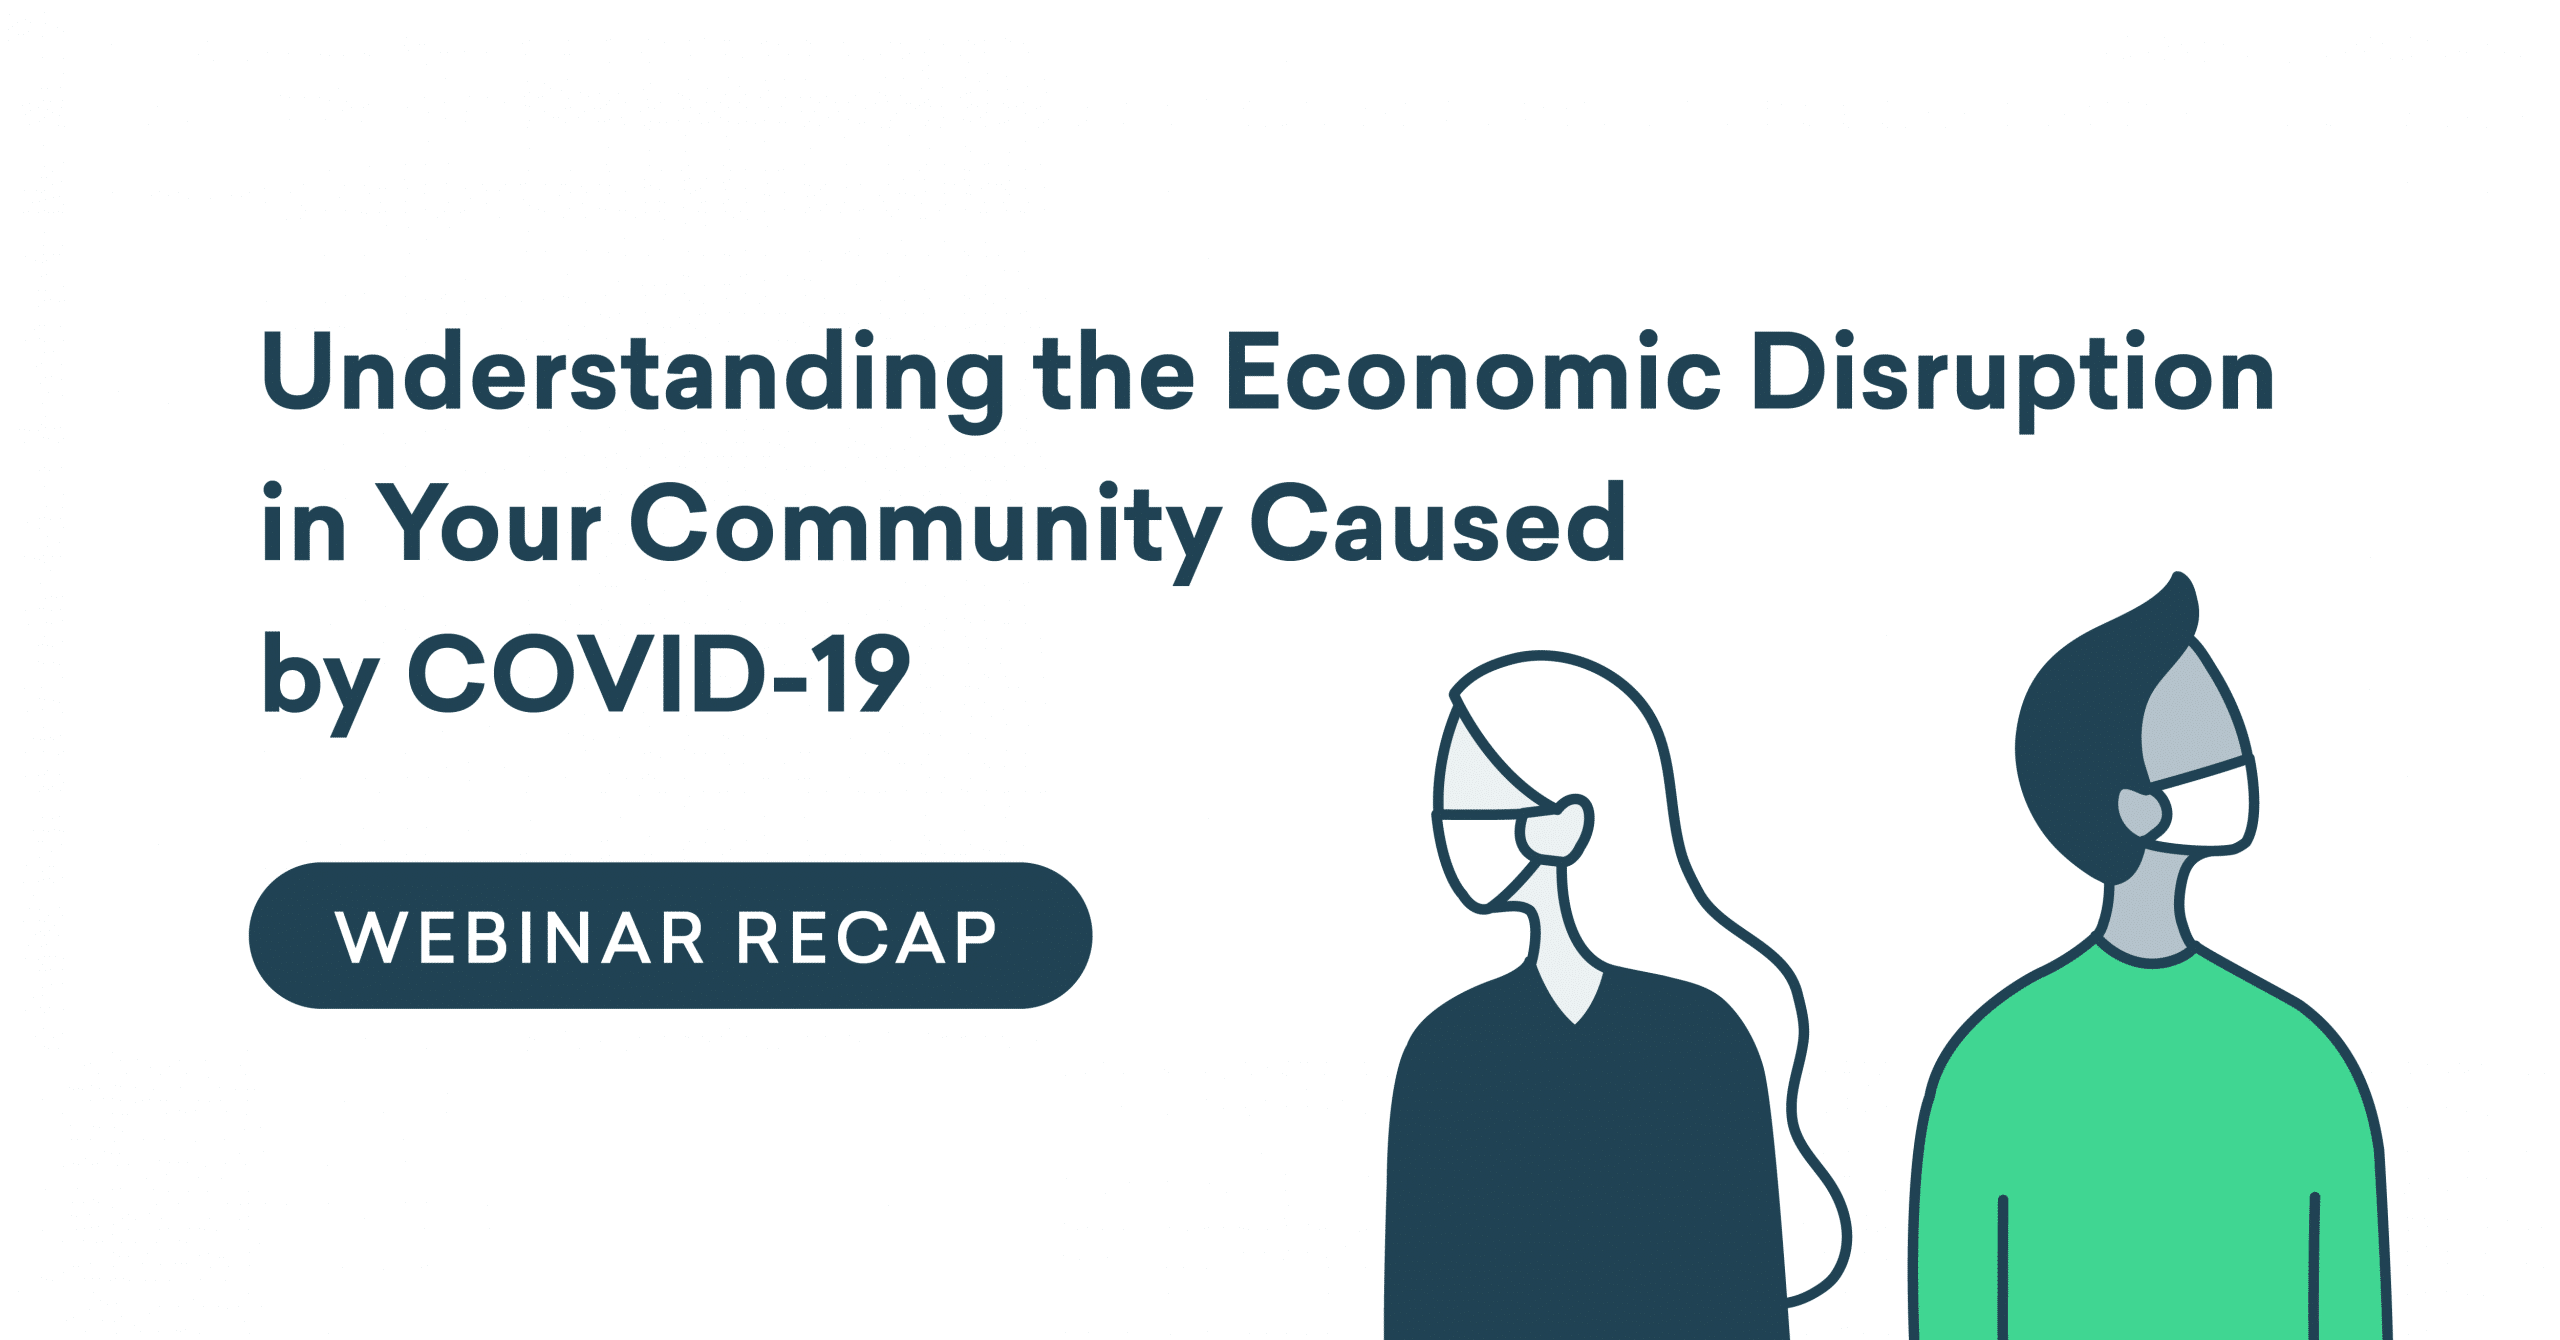 Webinar Recap: Understanding the Economic Disruption in Your Community Caused by COVID-19